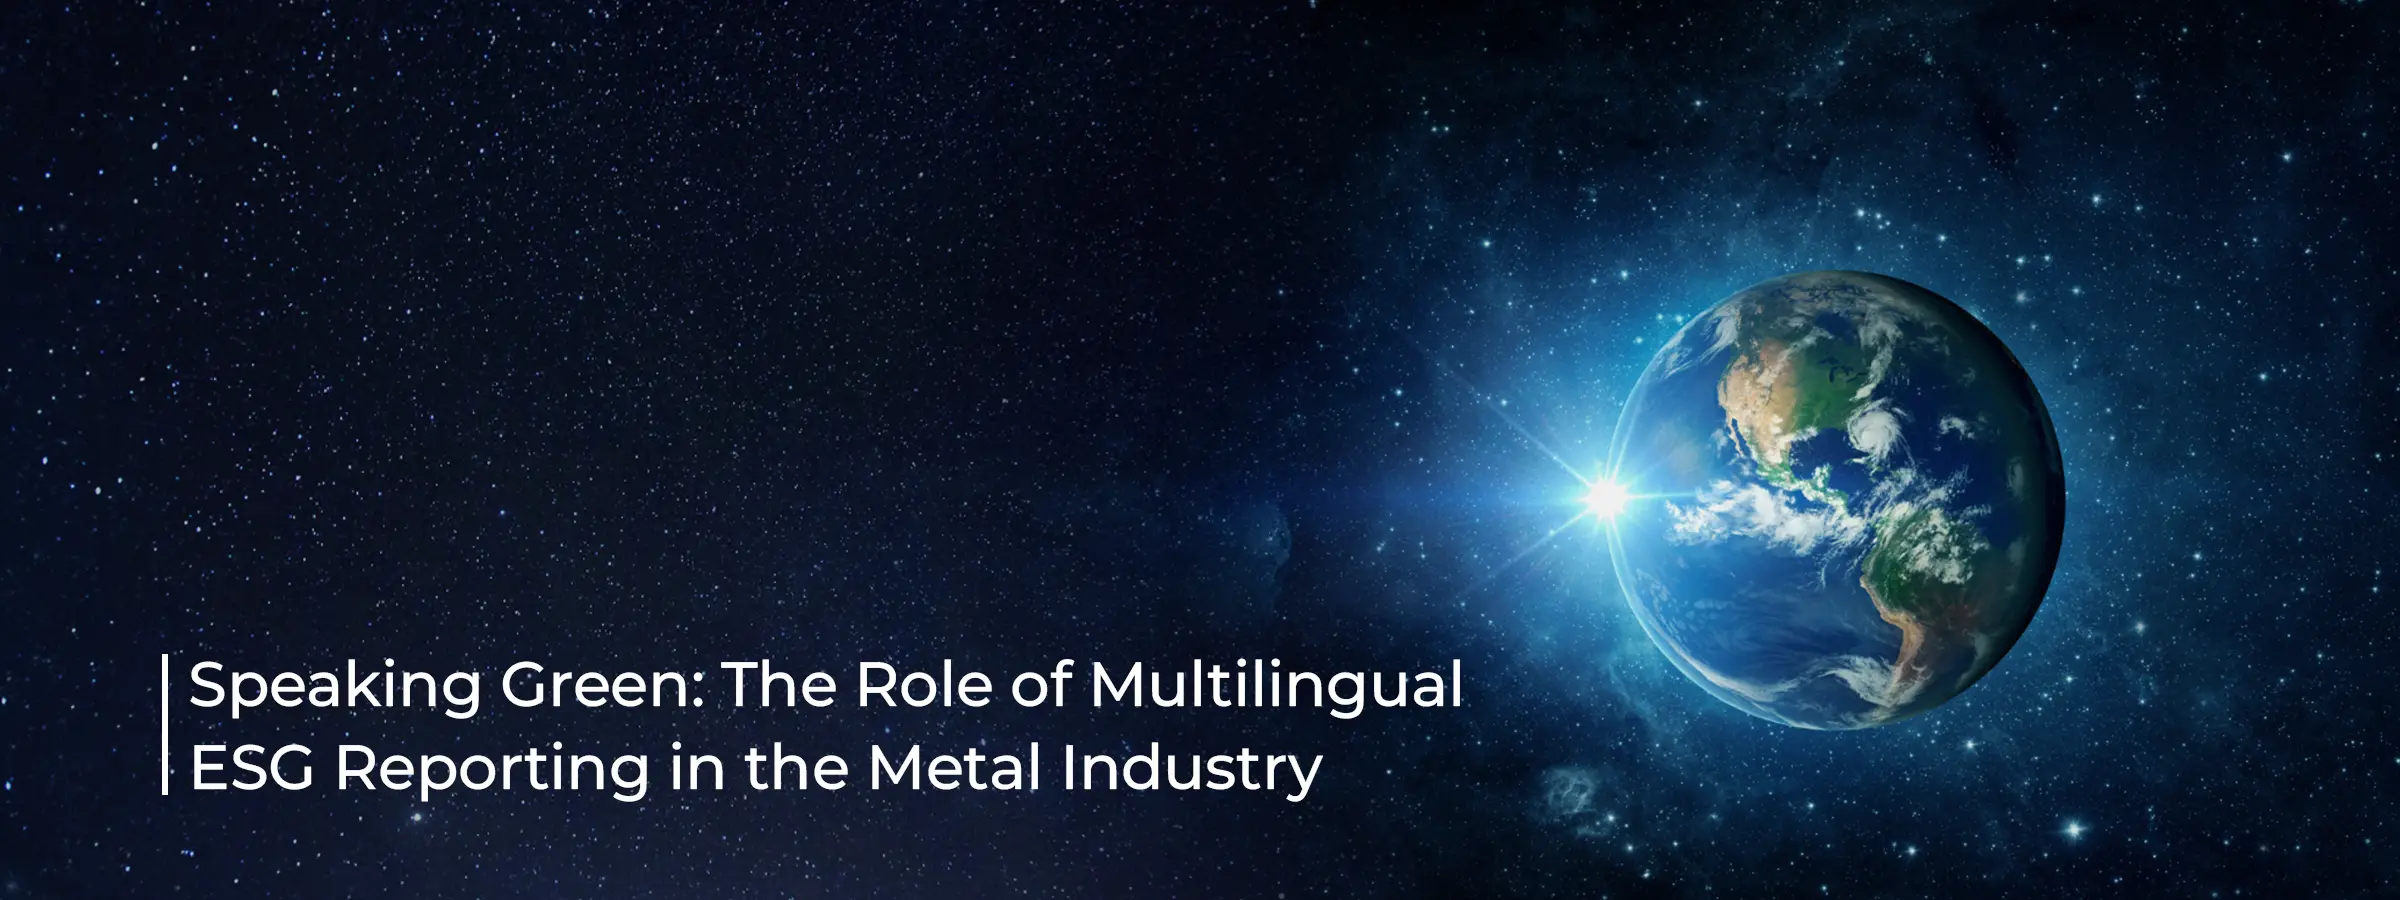 speaking-green-the-role-of-multilingual-esg-reporting-in-the-metal-industry